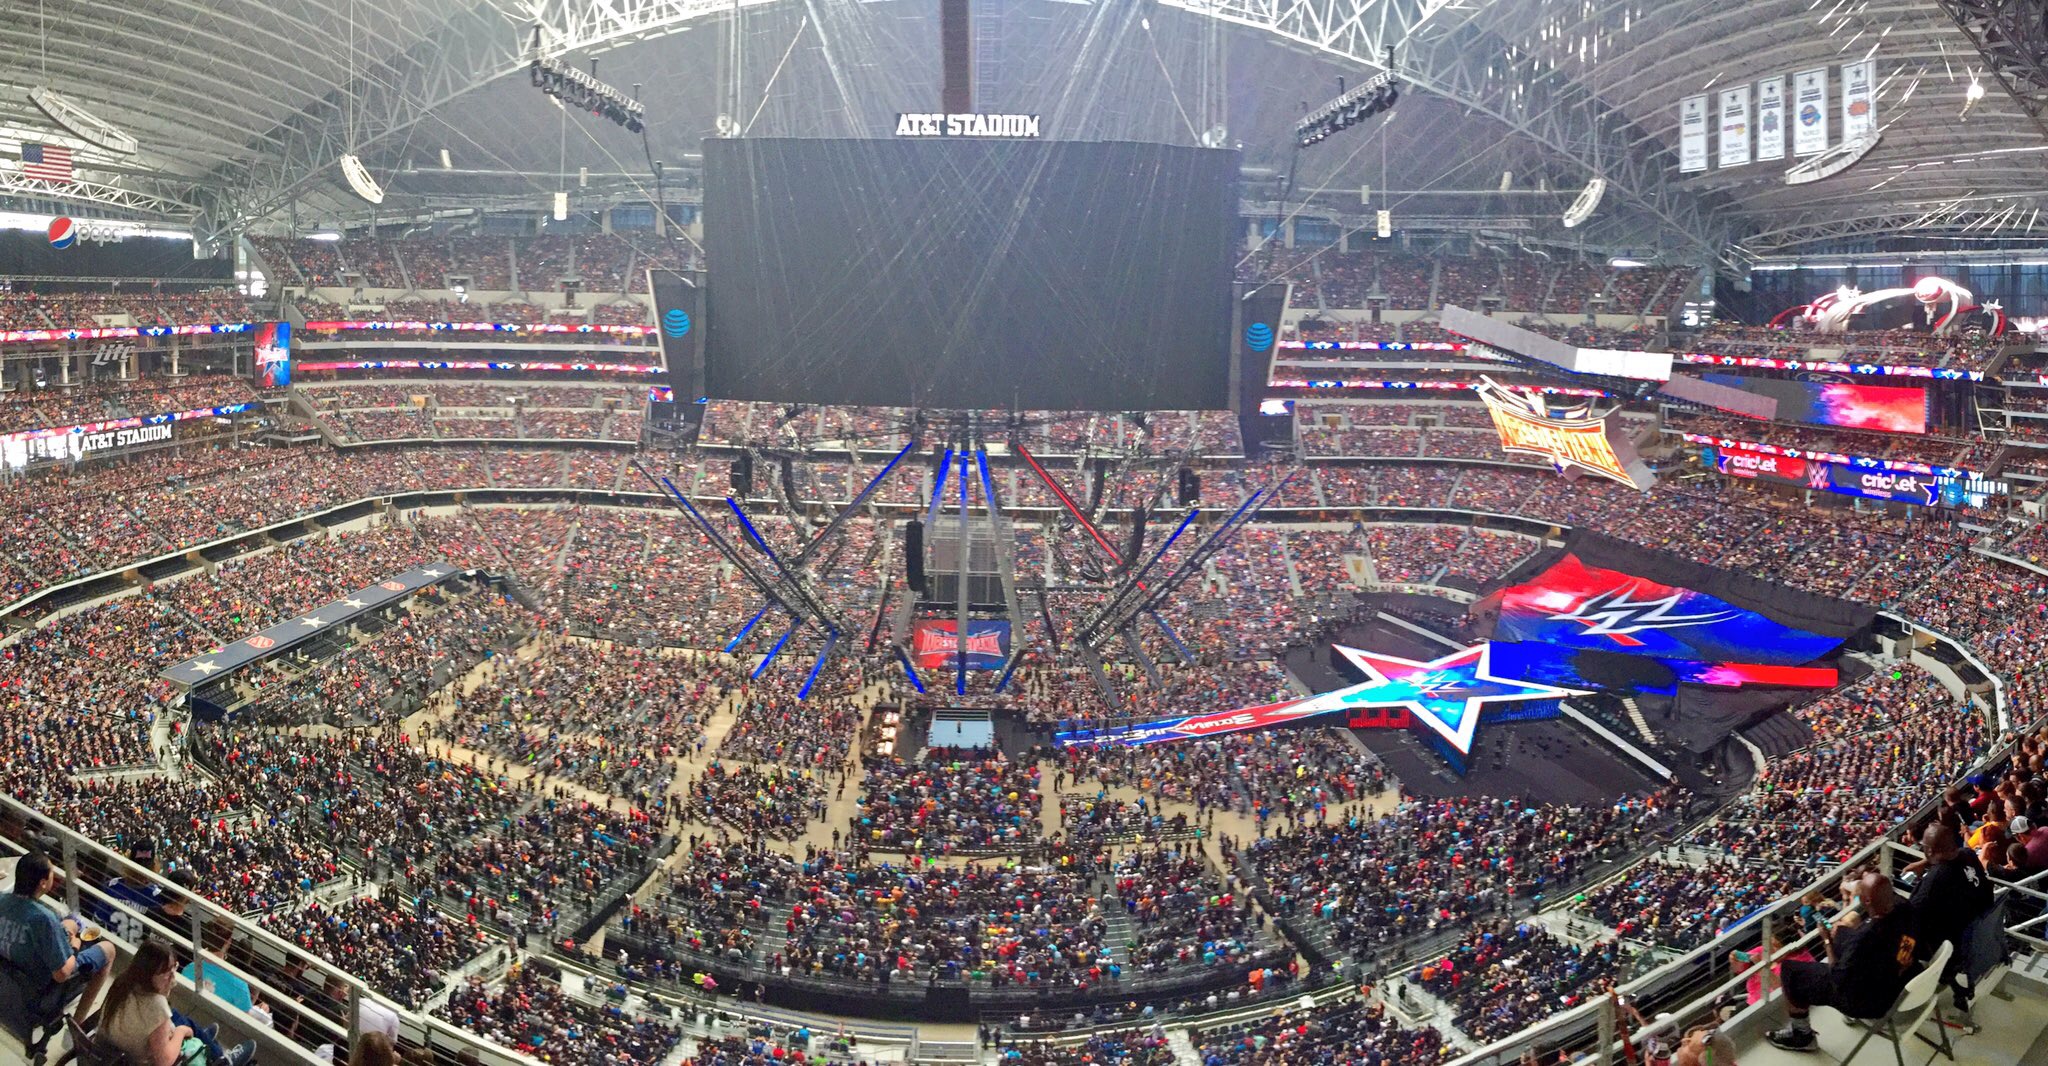 PHOTOS LIVE from WrestleMania 32 in Dallas!